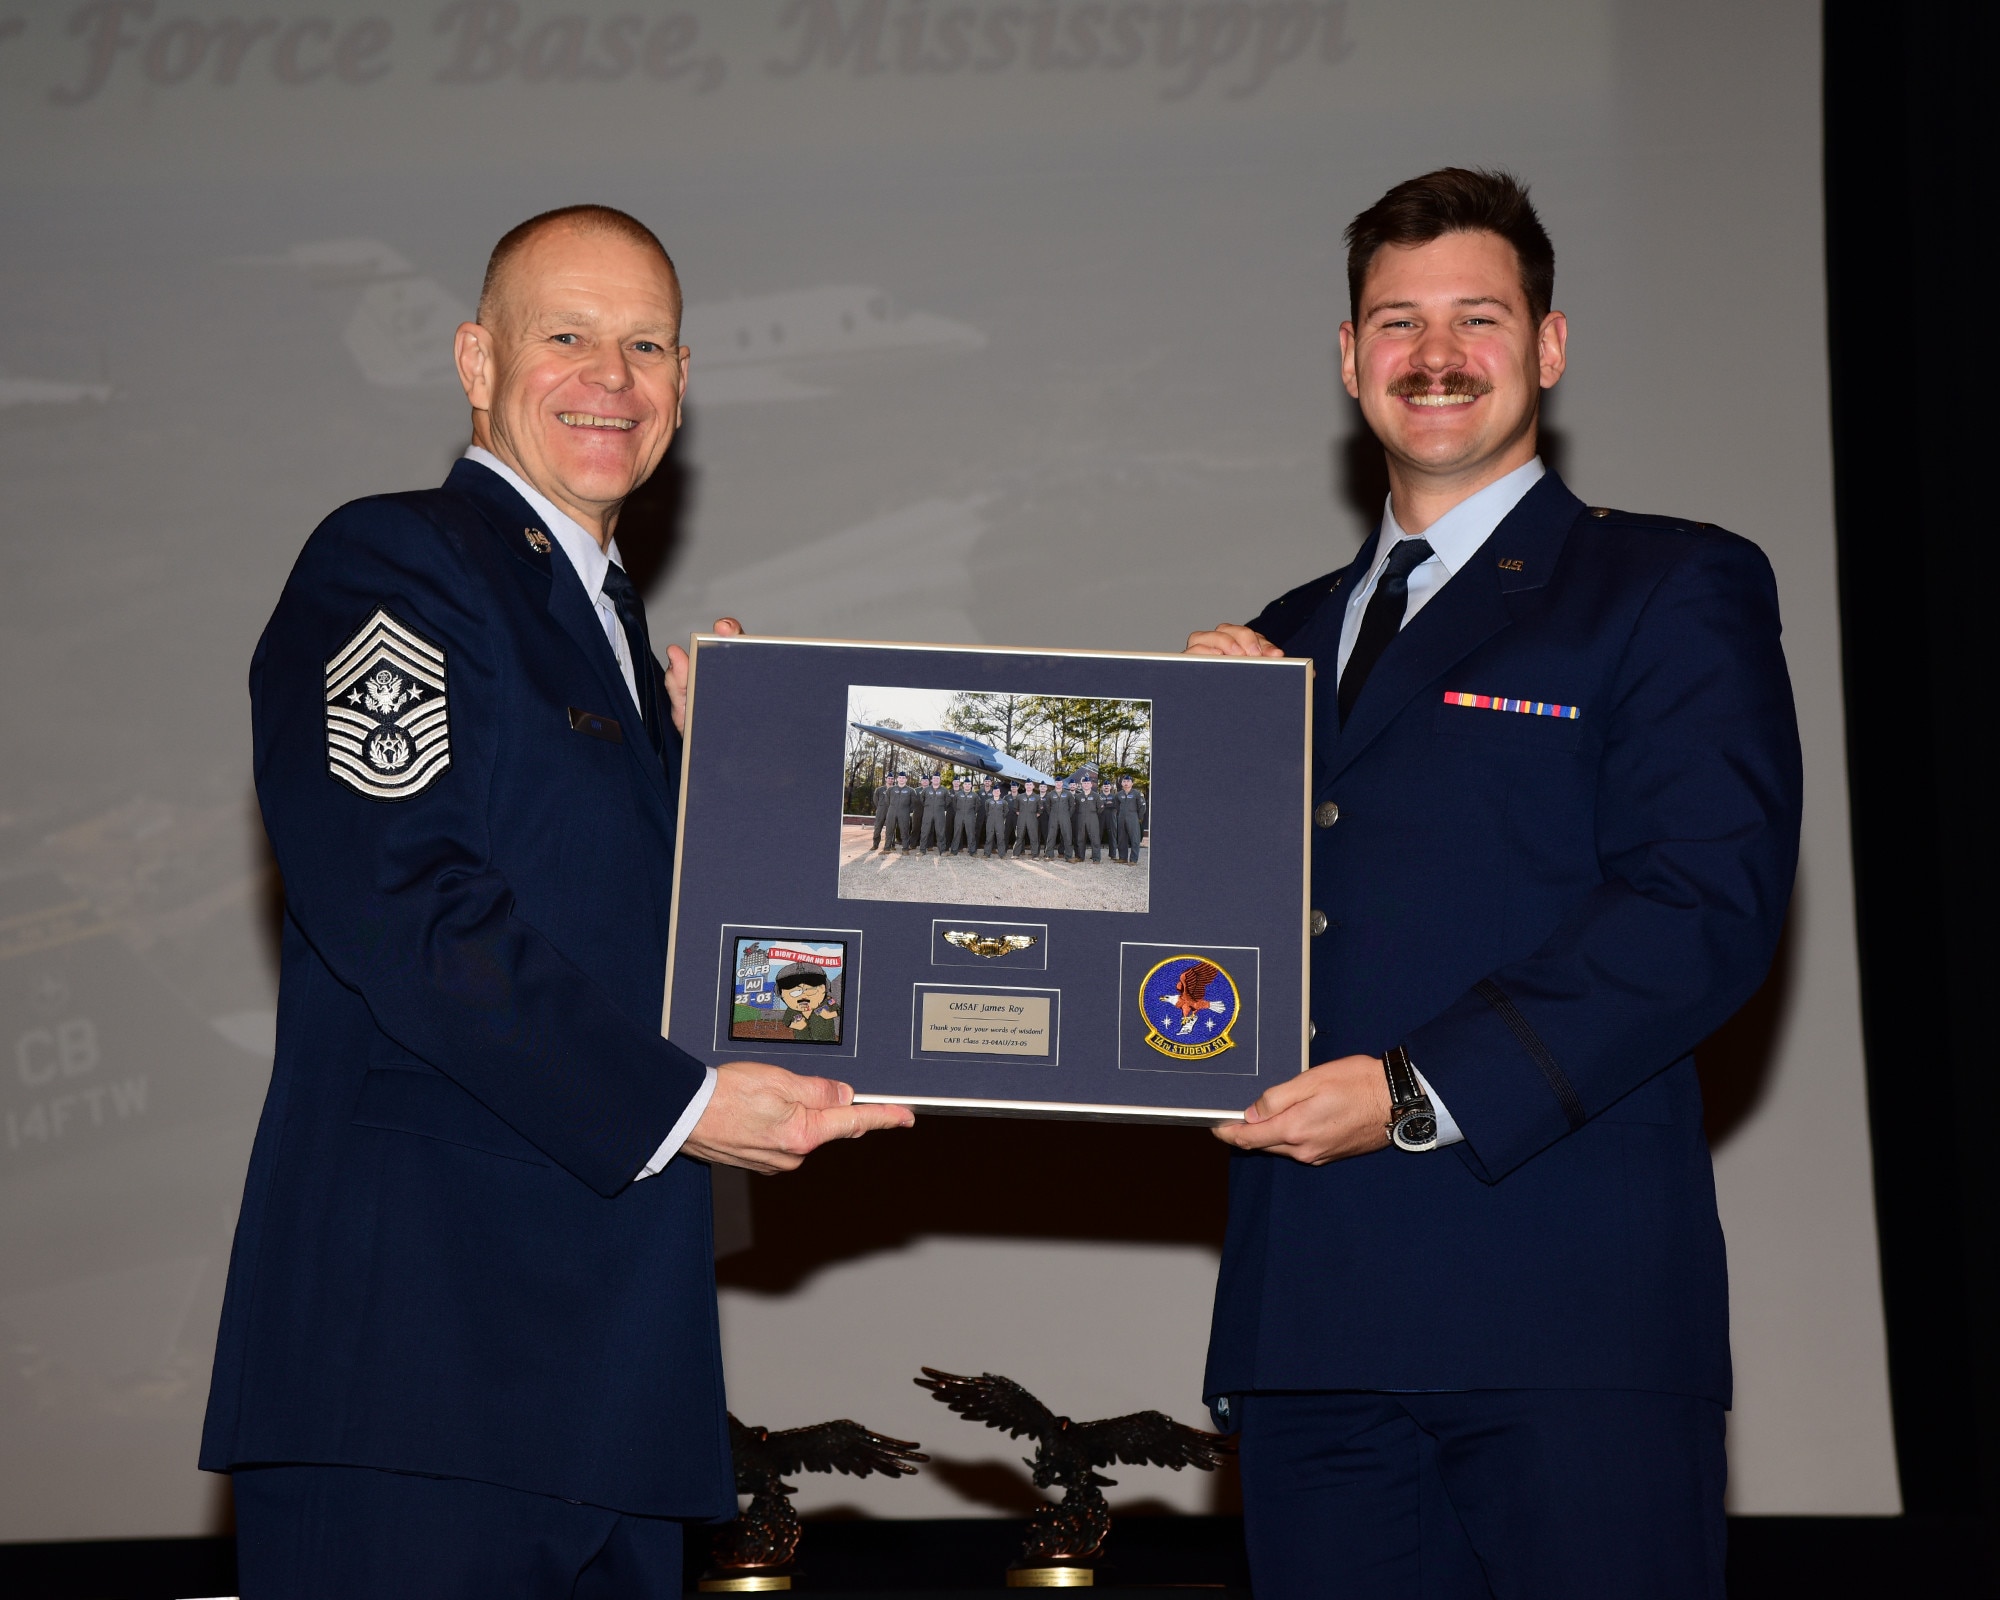 Chief Master Sergeant of the Air Force #16 (retired), James A. Roy, receives a gift from Undergraduate Pilot Training classes 23-04AU and 23-05 during their graduation ceremony. Roy is a former Command Chief at CAFB and returned to attend several events the base is hosting this week. (U.S. Air Force photo by Melissa Duncan-Doublin)